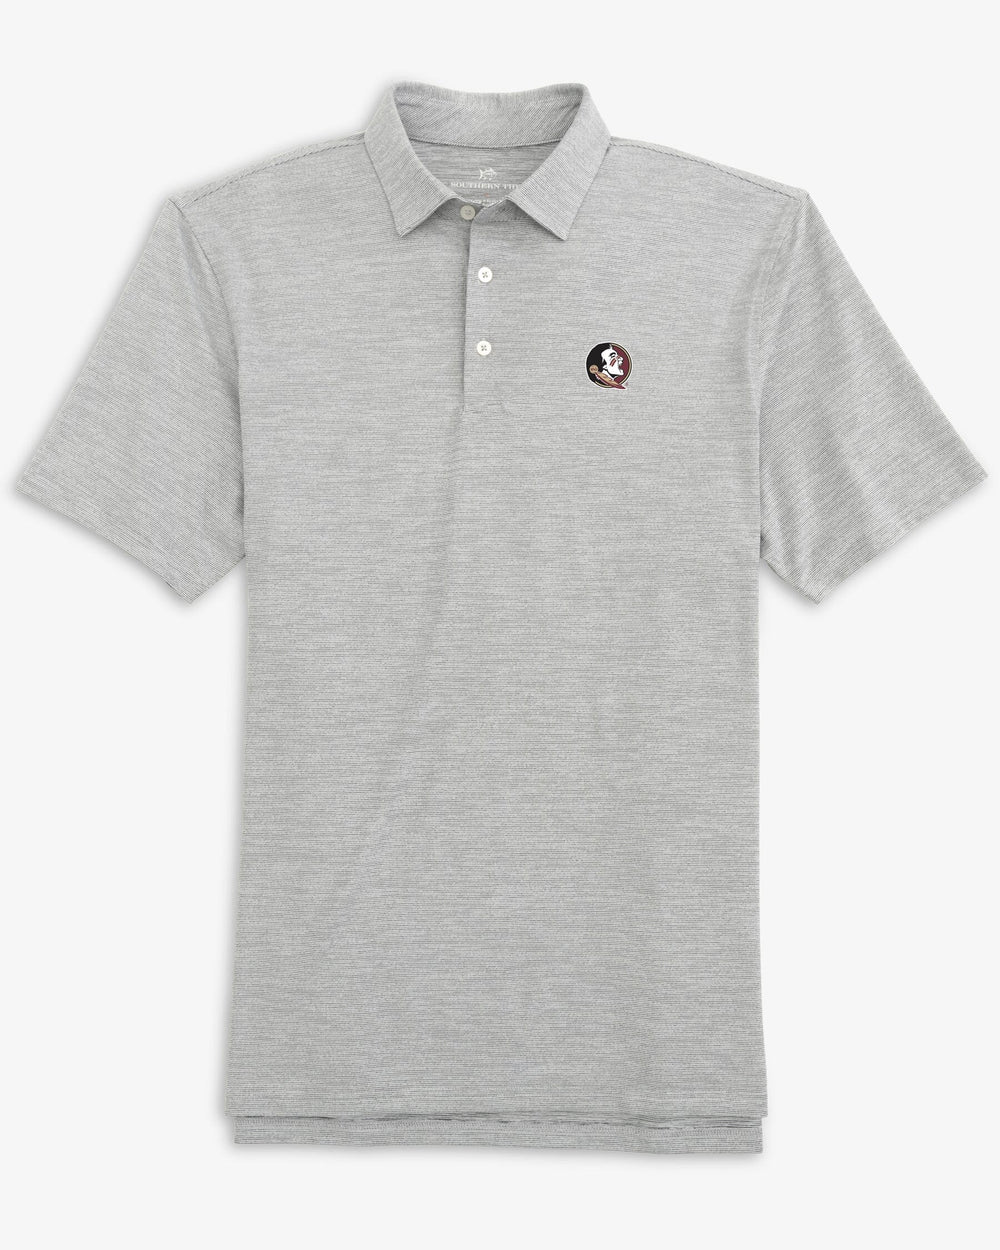 The front of the FSU Seminoles Driver Spacedye Polo Shirt by Southern Tide - Black